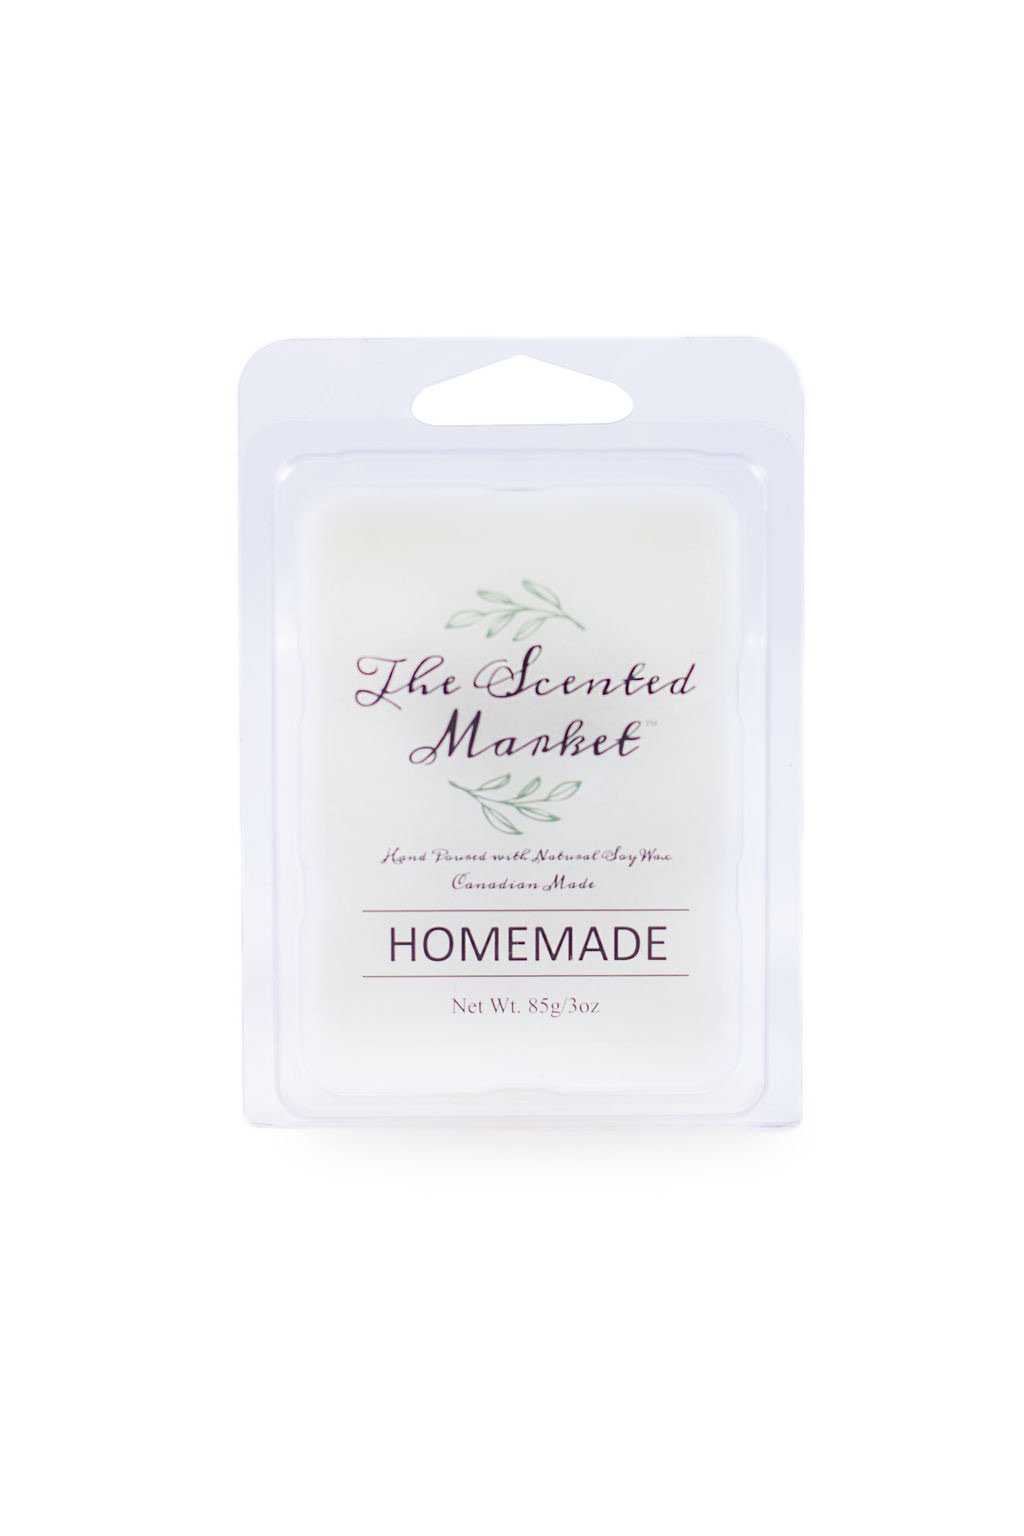 The Scented Market Soy Wax Melt